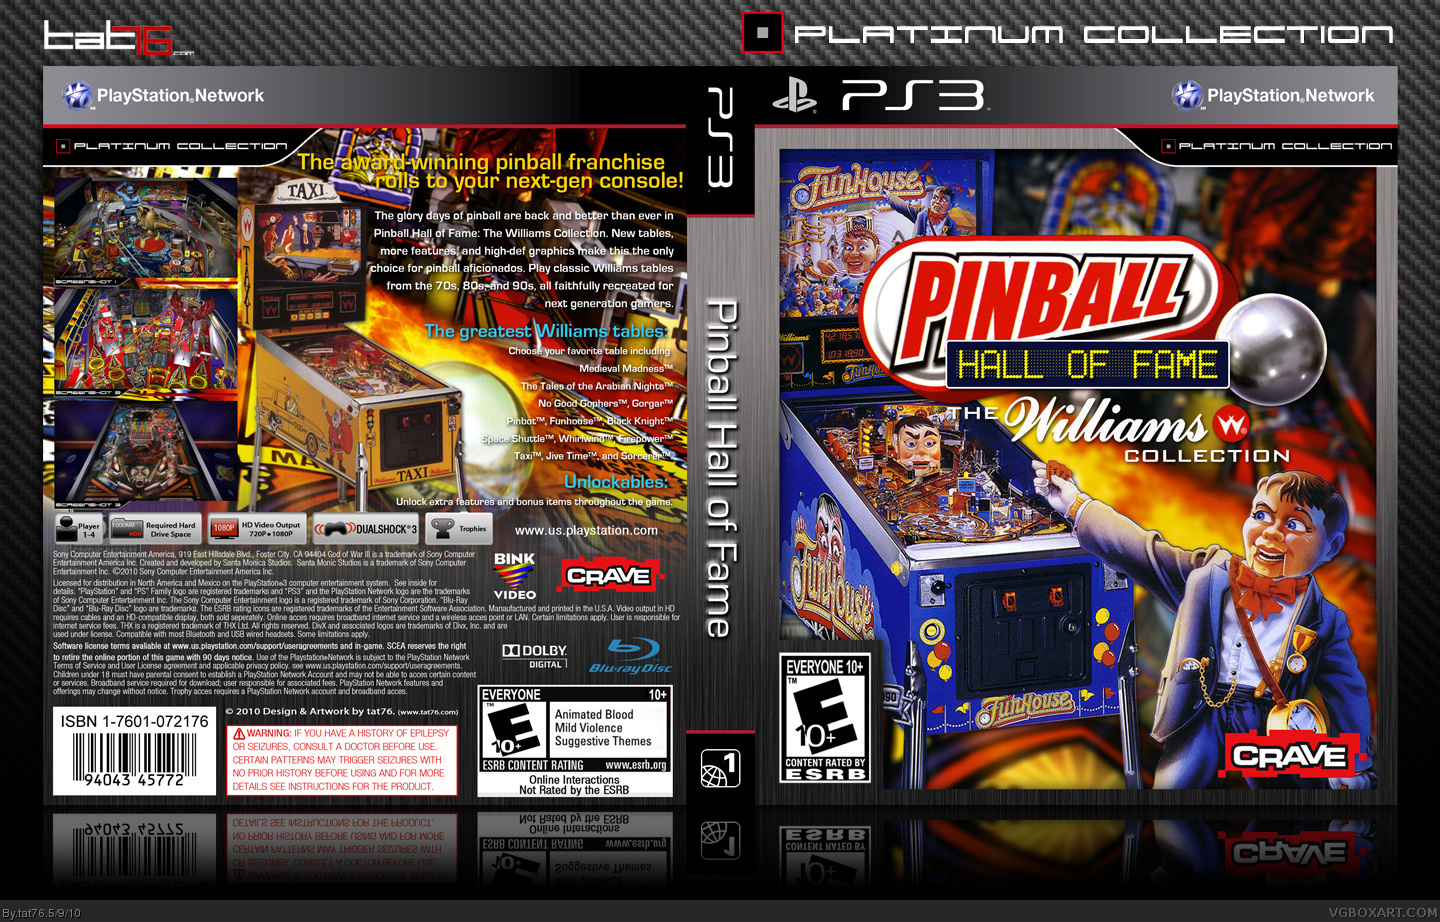 Pinball Hall of Fame - The Williams Collection box cover